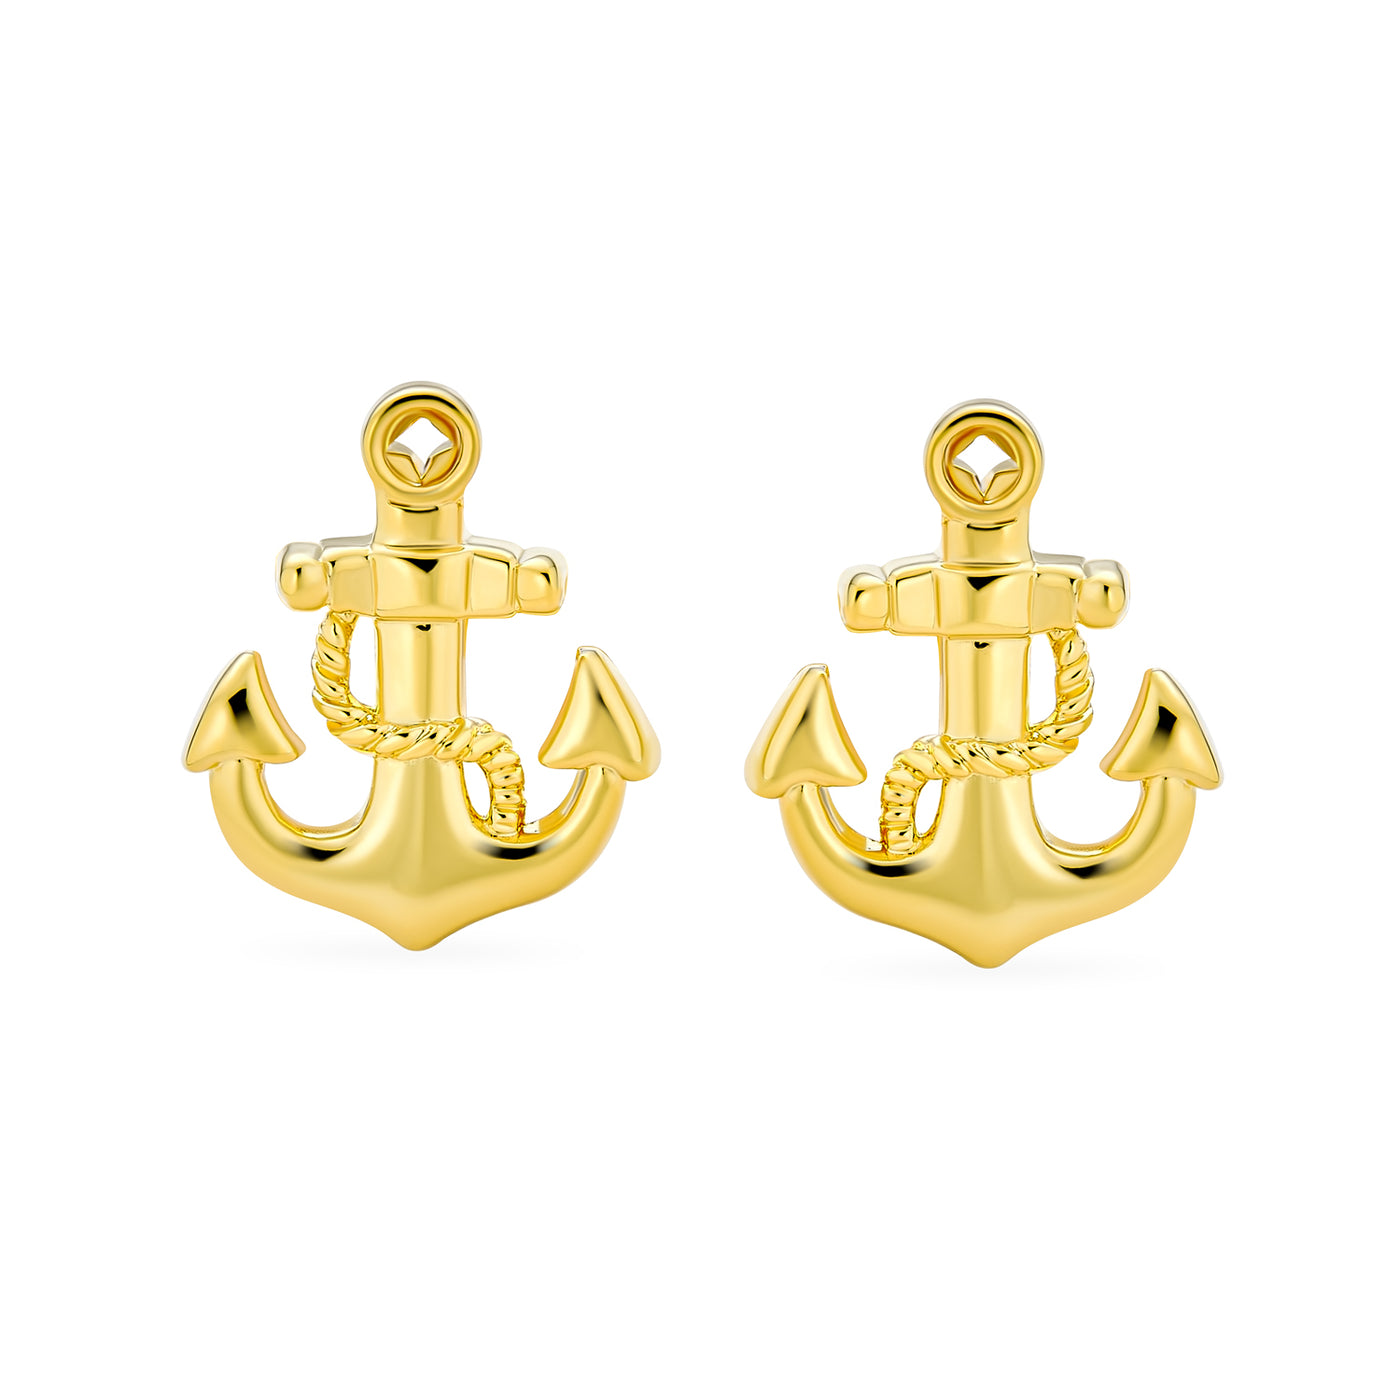 Nautical Anchor Rope Boater Sailor Shirt Cufflinks Gold Plated Steel